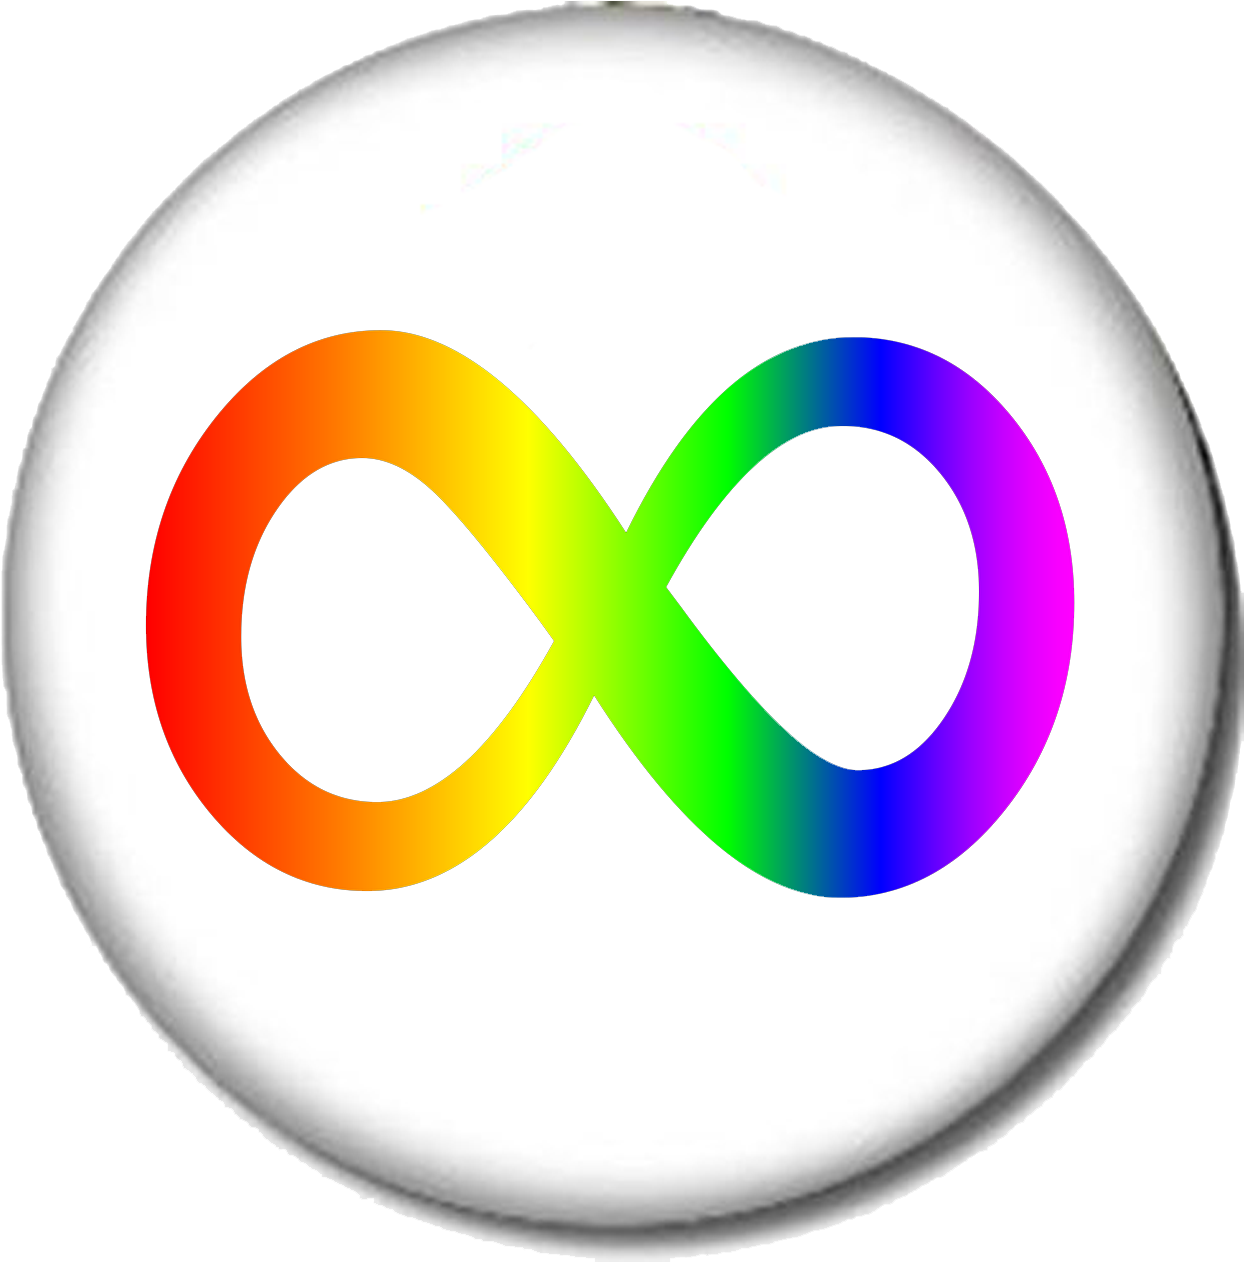 Colorful Infinity Symbol Button